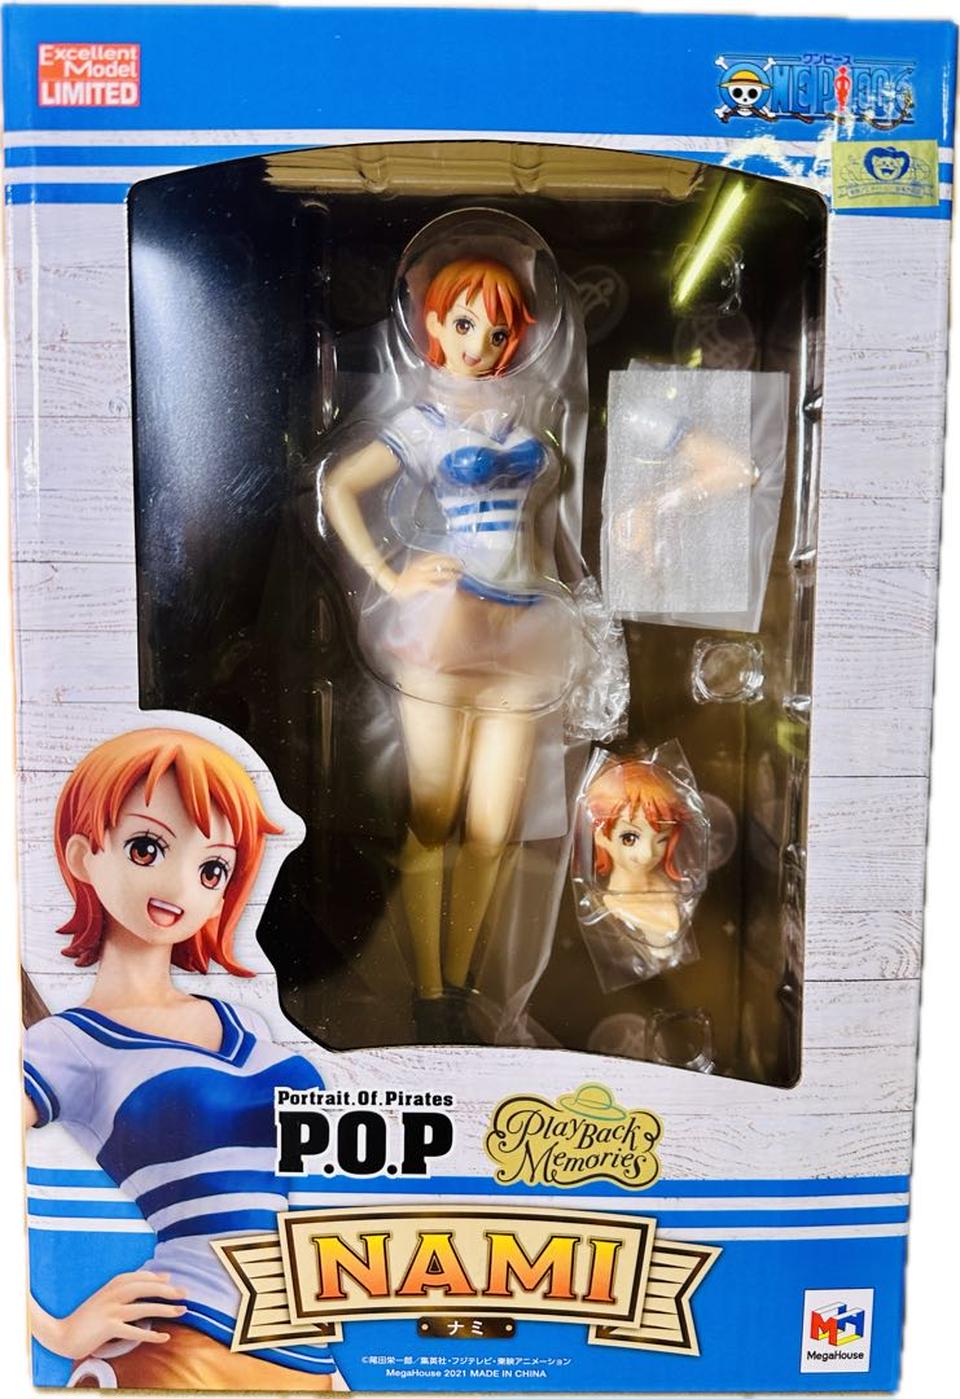 Portrait Of Pirates Playback Memories One Piece Nami Figure for Sale